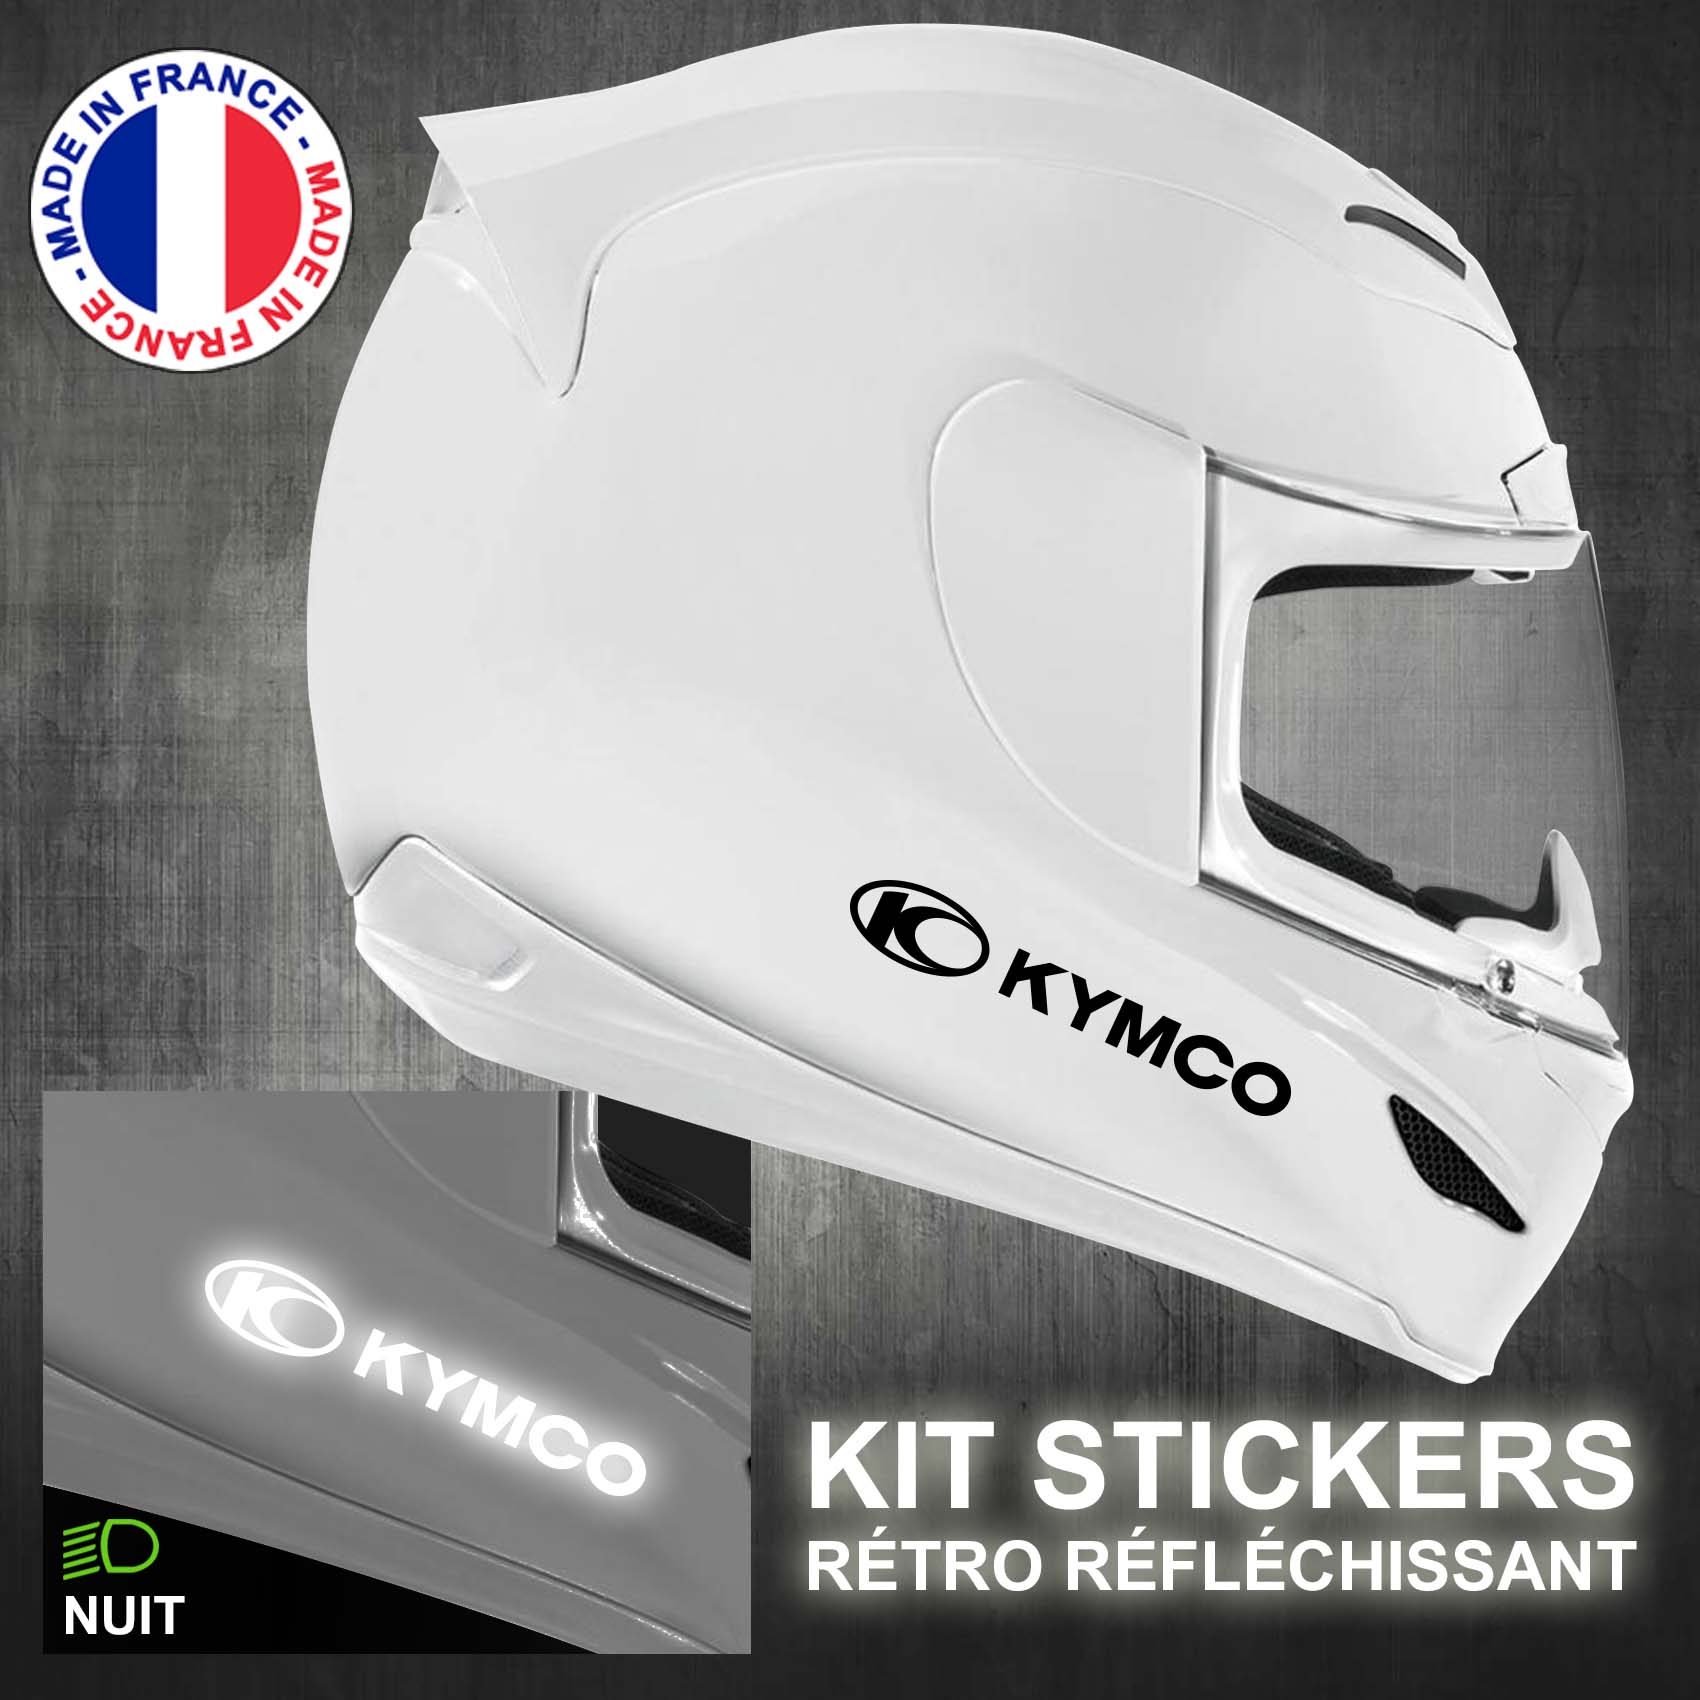 stickers-casque-moto-kymco-ref1-retro-reflechissant-autocollant-moto-velo-tuning-racing-route-sticker-casques-adhesif-scooter-nuit-securite-decals-personnalise-personnalisable-min